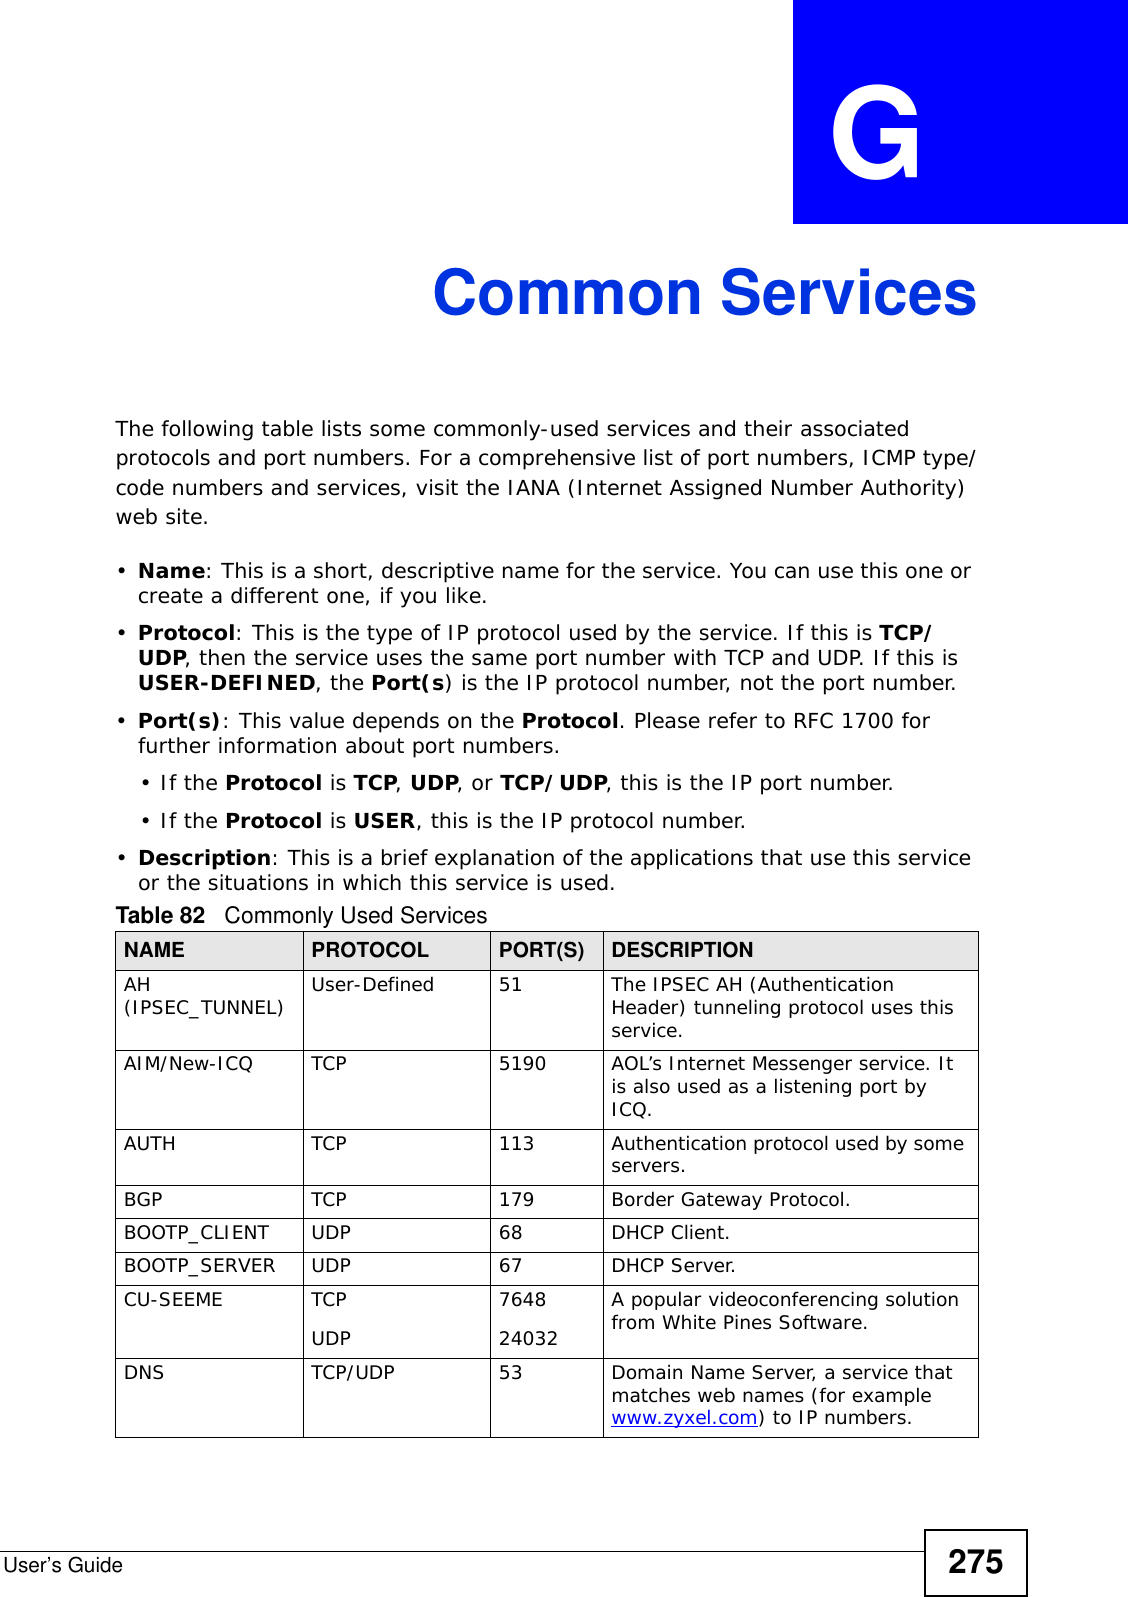 User’s Guide 275APPENDIX  G Common ServicesThe following table lists some commonly-used services and their associated protocols and port numbers. For a comprehensive list of port numbers, ICMP type/code numbers and services, visit the IANA (Internet Assigned Number Authority) web site. •Name: This is a short, descriptive name for the service. You can use this one or create a different one, if you like.•Protocol: This is the type of IP protocol used by the service. If this is TCP/UDP, then the service uses the same port number with TCP and UDP. If this is USER-DEFINED, the Port(s) is the IP protocol number, not the port number.•Port(s): This value depends on the Protocol. Please refer to RFC 1700 for further information about port numbers.•If the Protocol is TCP, UDP, or TCP/UDP, this is the IP port number.•If the Protocol is USER, this is the IP protocol number.•Description: This is a brief explanation of the applications that use this service or the situations in which this service is used.Table 82   Commonly Used ServicesNAME PROTOCOL PORT(S) DESCRIPTIONAH (IPSEC_TUNNEL) User-Defined 51 The IPSEC AH (Authentication Header) tunneling protocol uses this service.AIM/New-ICQ TCP 5190 AOL’s Internet Messenger service. It is also used as a listening port by ICQ.AUTH TCP 113 Authentication protocol used by some servers.BGP TCP 179 Border Gateway Protocol.BOOTP_CLIENT UDP 68 DHCP Client.BOOTP_SERVER UDP 67 DHCP Server.CU-SEEME TCPUDP764824032A popular videoconferencing solution from White Pines Software.DNS TCP/UDP 53 Domain Name Server, a service that matches web names (for example www.zyxel.com) to IP numbers.